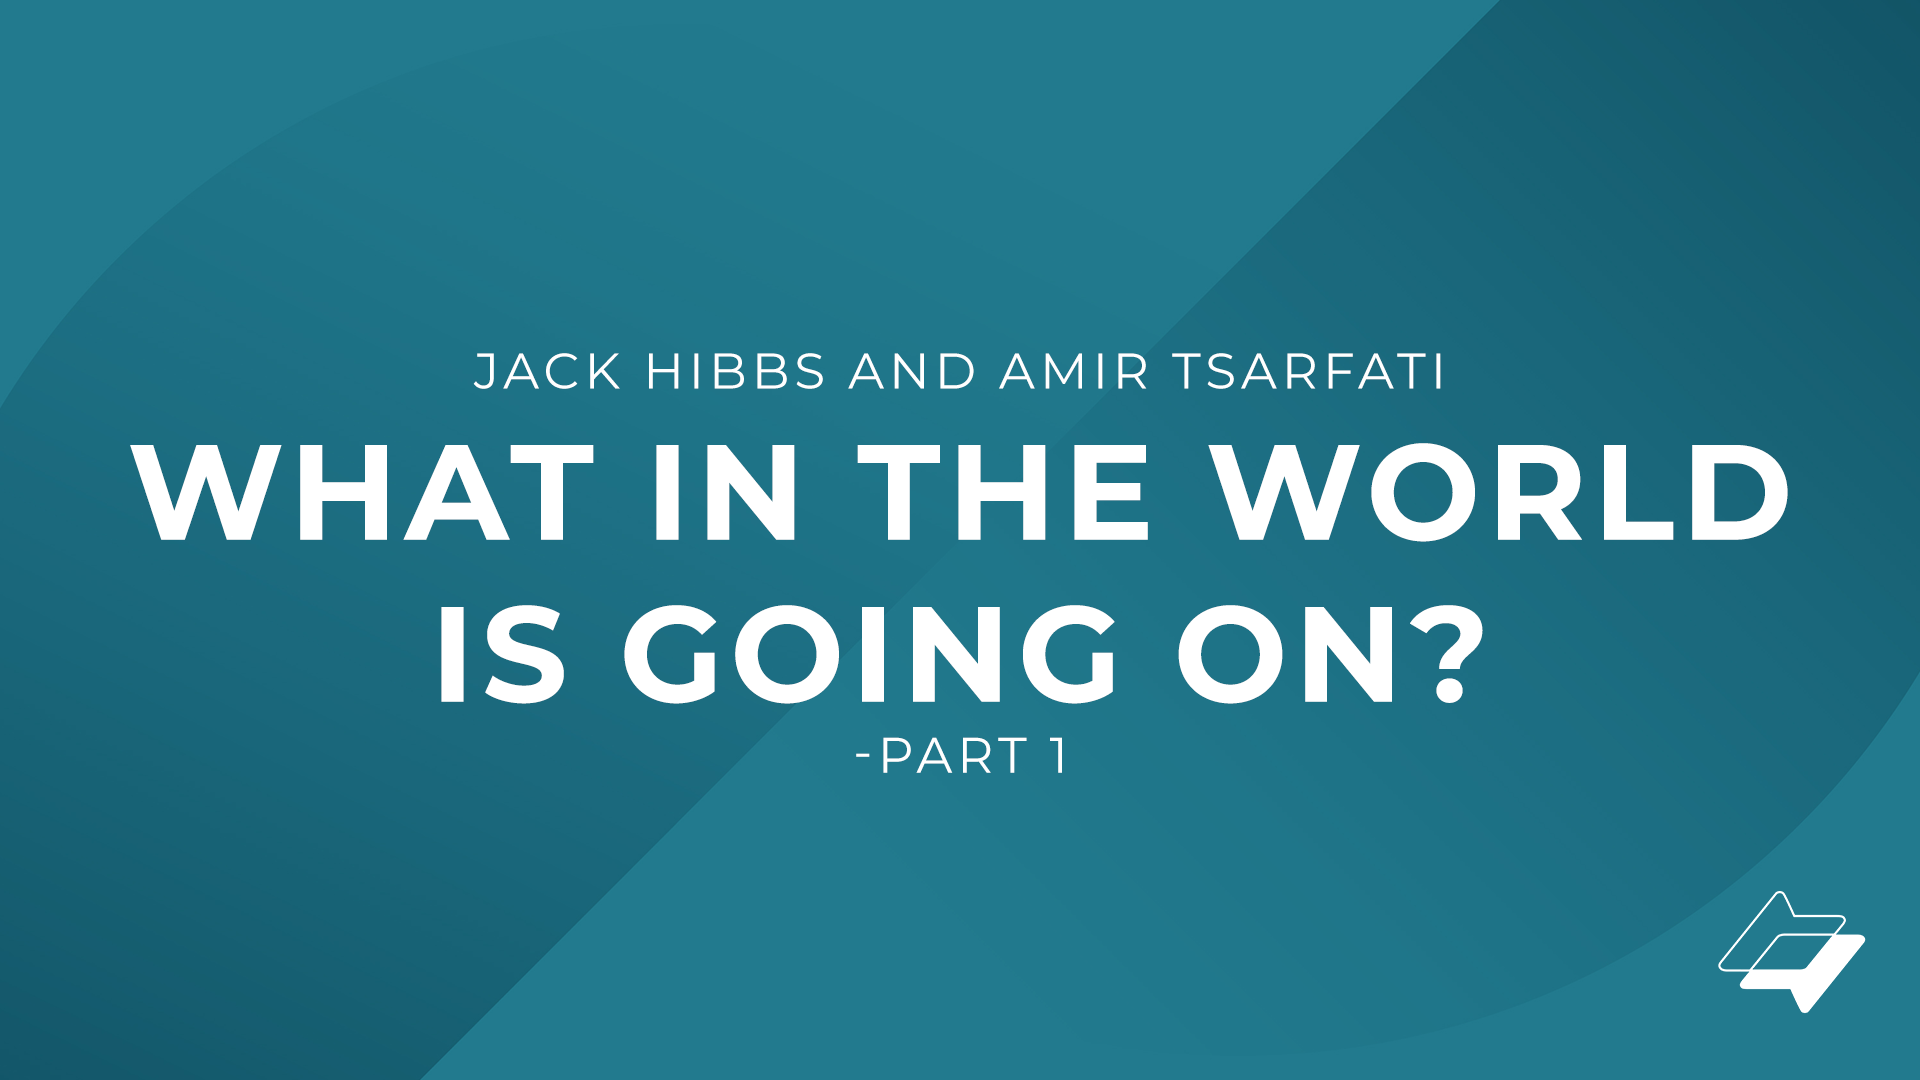 Jack Hibbs and Amir Tsarfati – What in the World is Going On? – Part 1